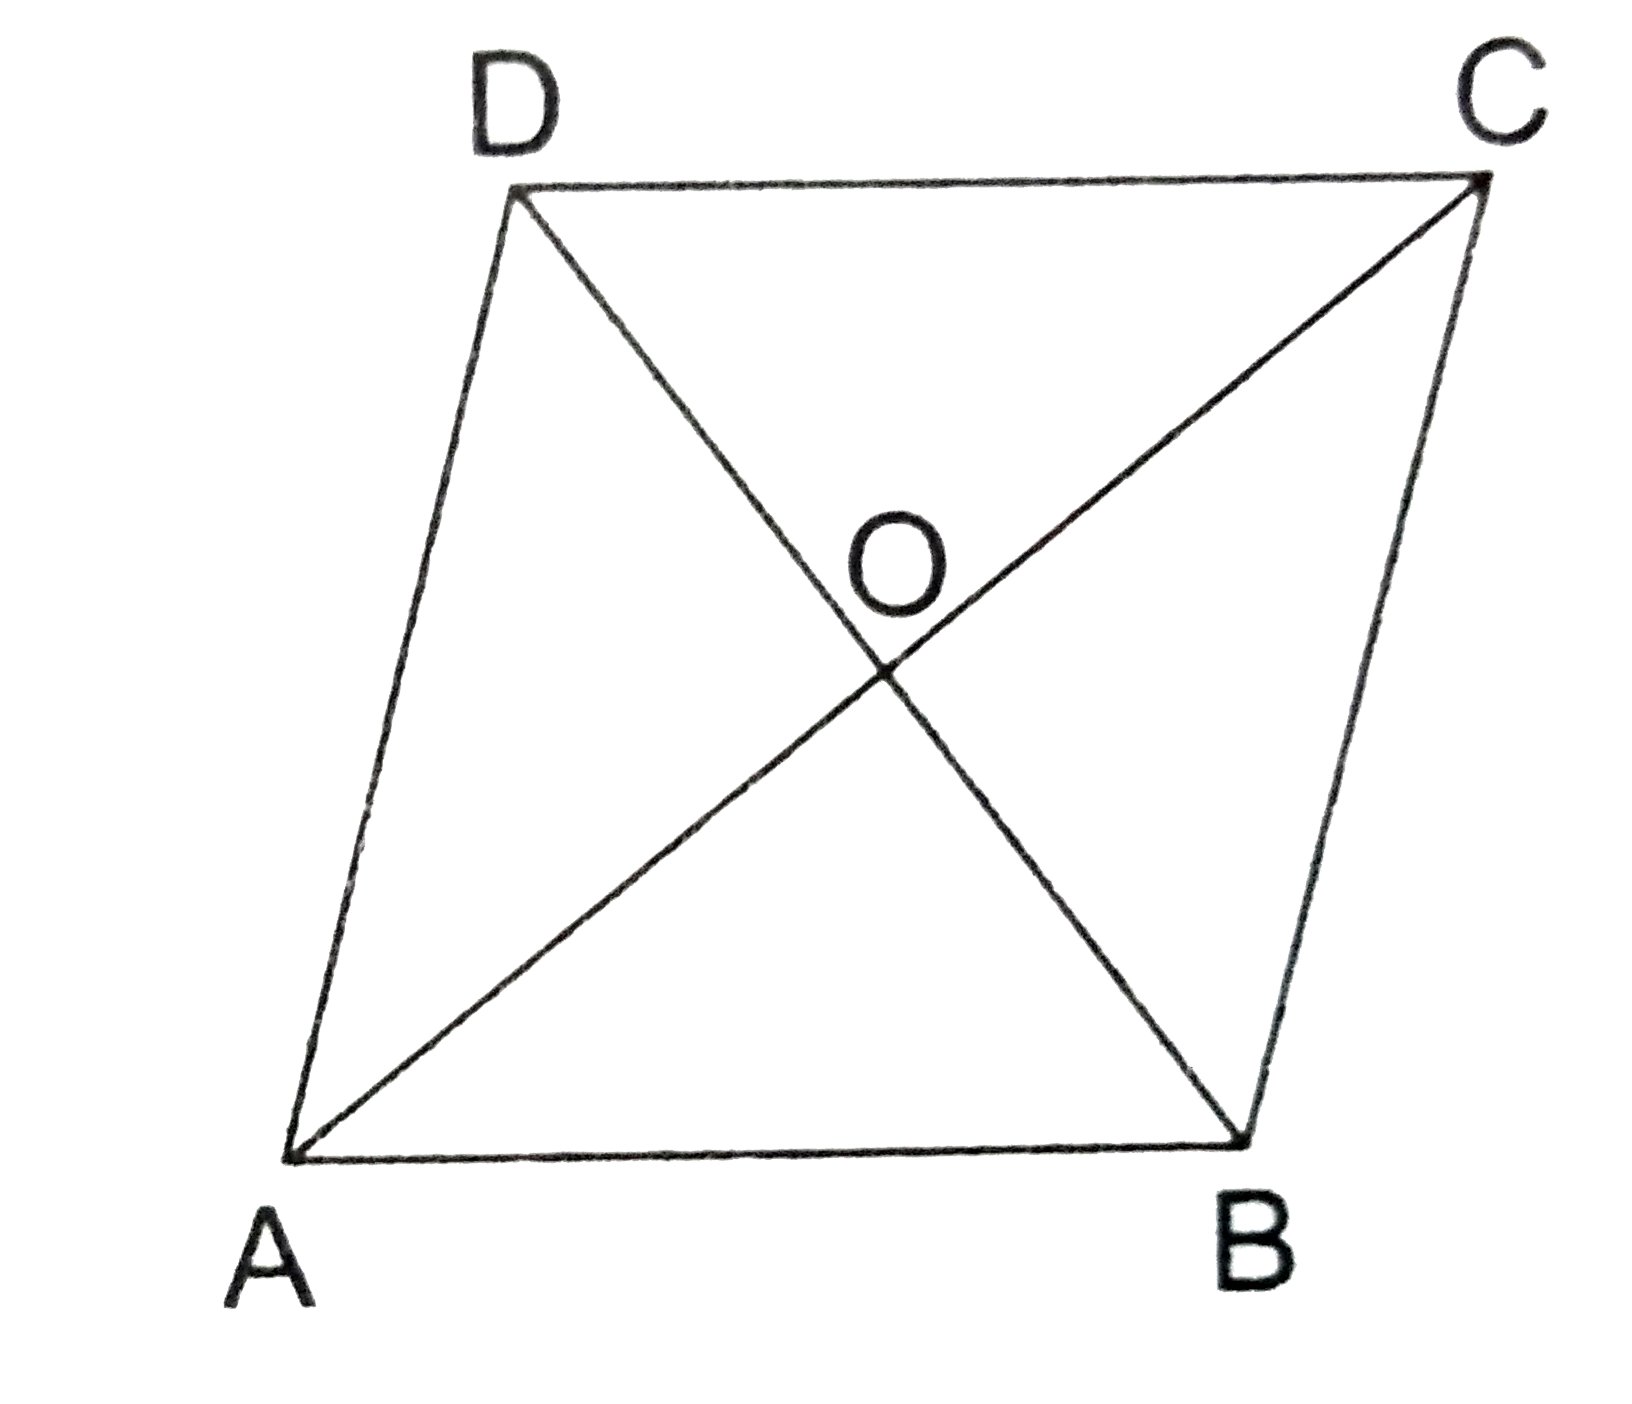 In the given figure, ABCD is a rhombus. Then,